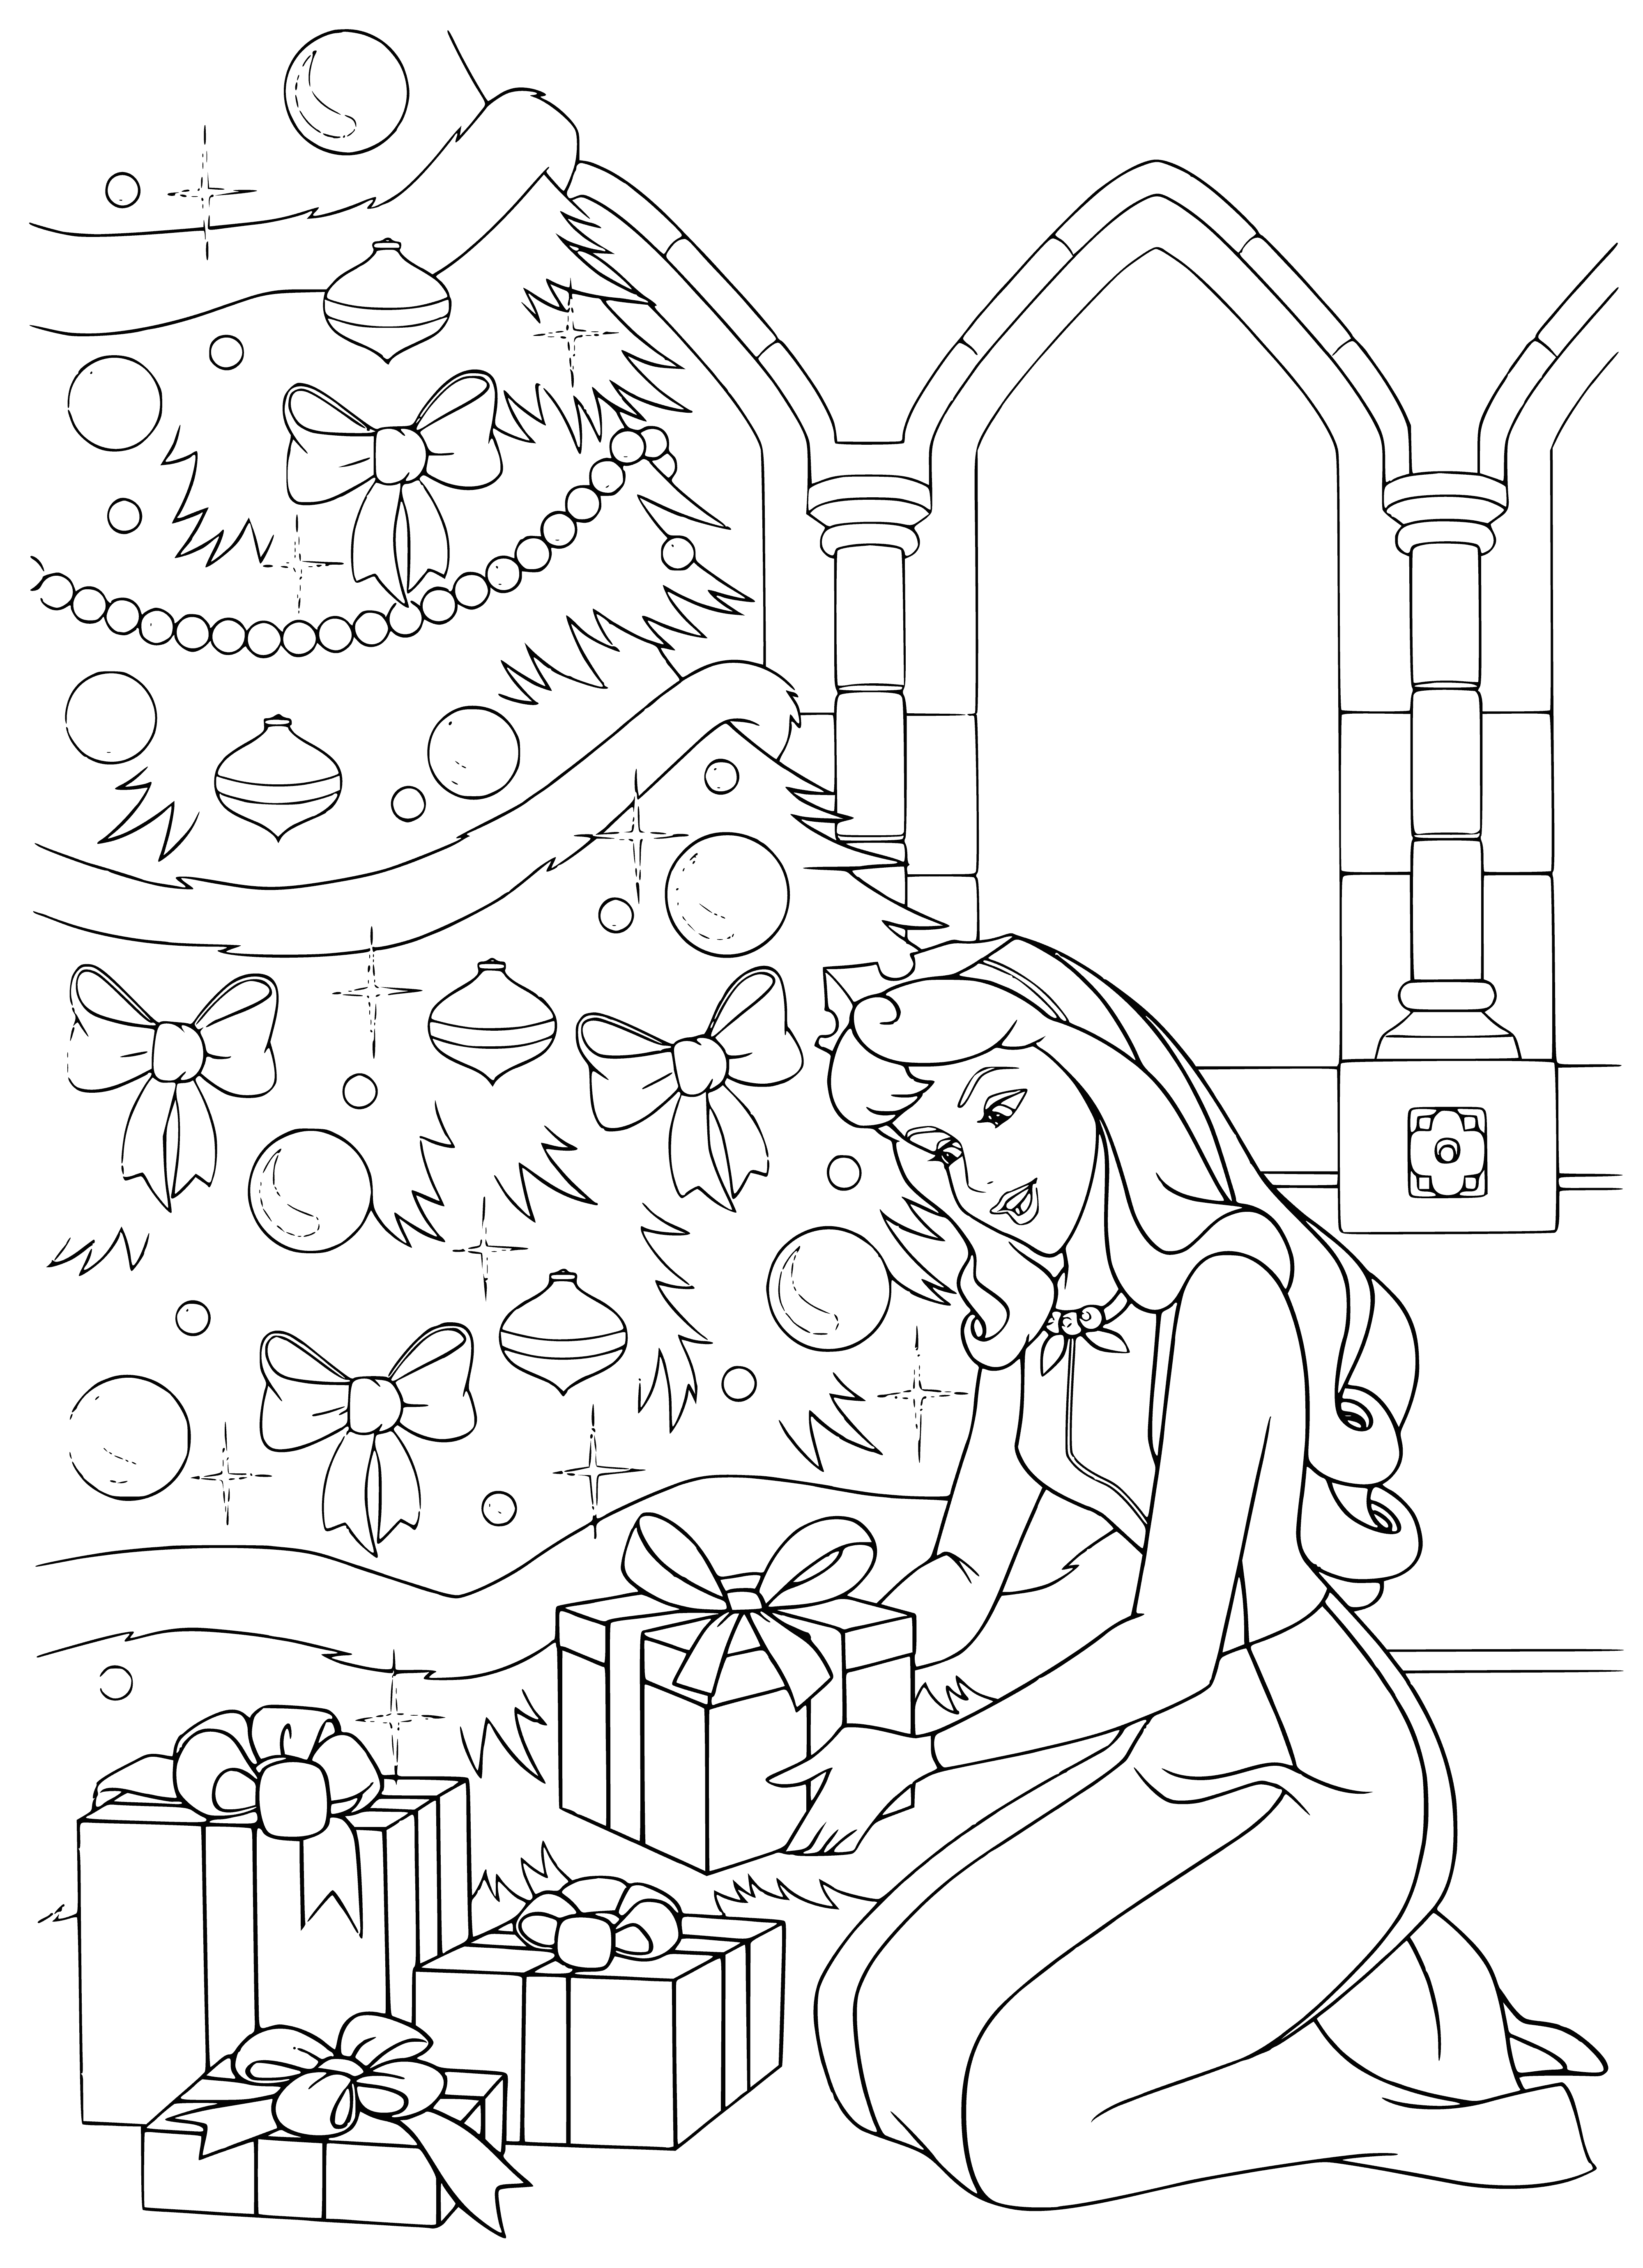 coloring page: Disney princesses gather around a Christmas tree, exchanging gifts and smiles. Clock in the background counts down to midnight on New Year's Eve.